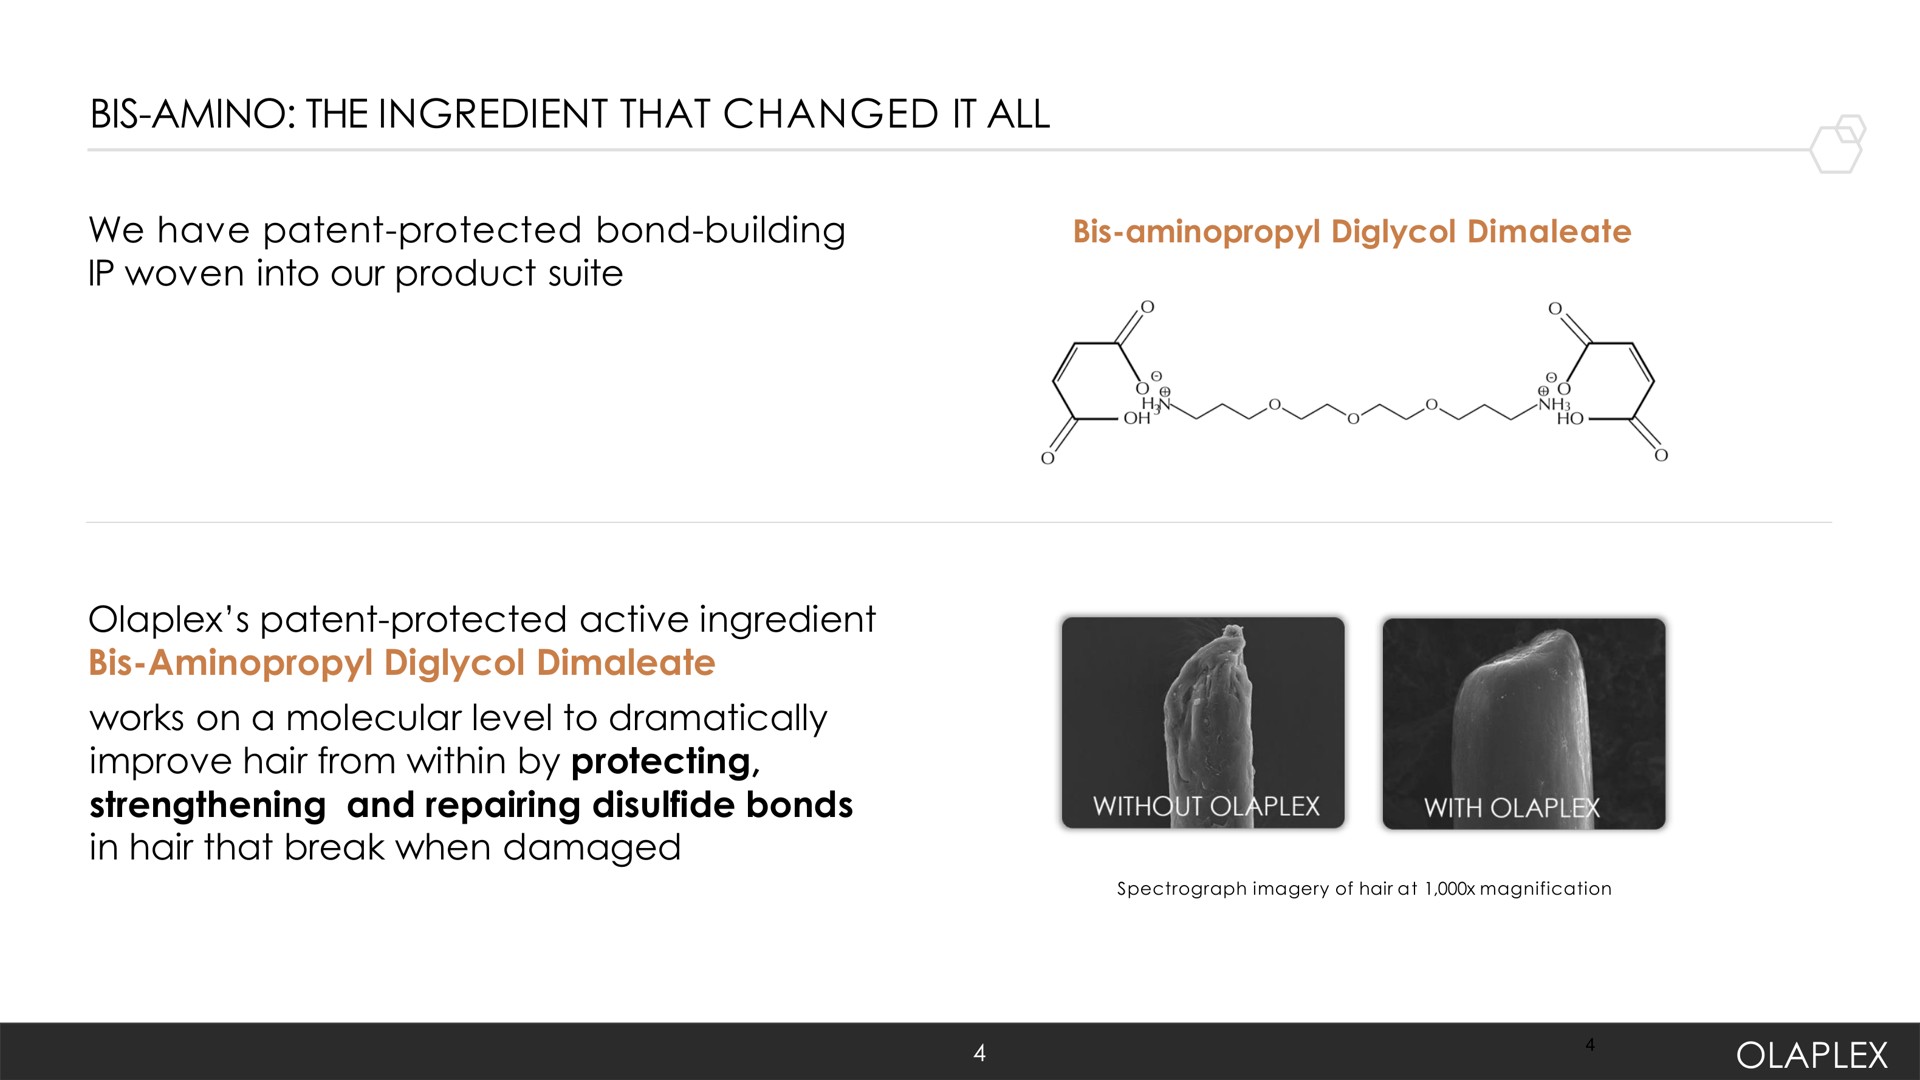 bis amino the ingredient that changed it all we have patent protected bond building woven into our product suite patent protected active ingredient bis works on a molecular level to dramatically improve hair from within by protecting strengthening and repairing bonds in hair that break when damaged | Olaplex